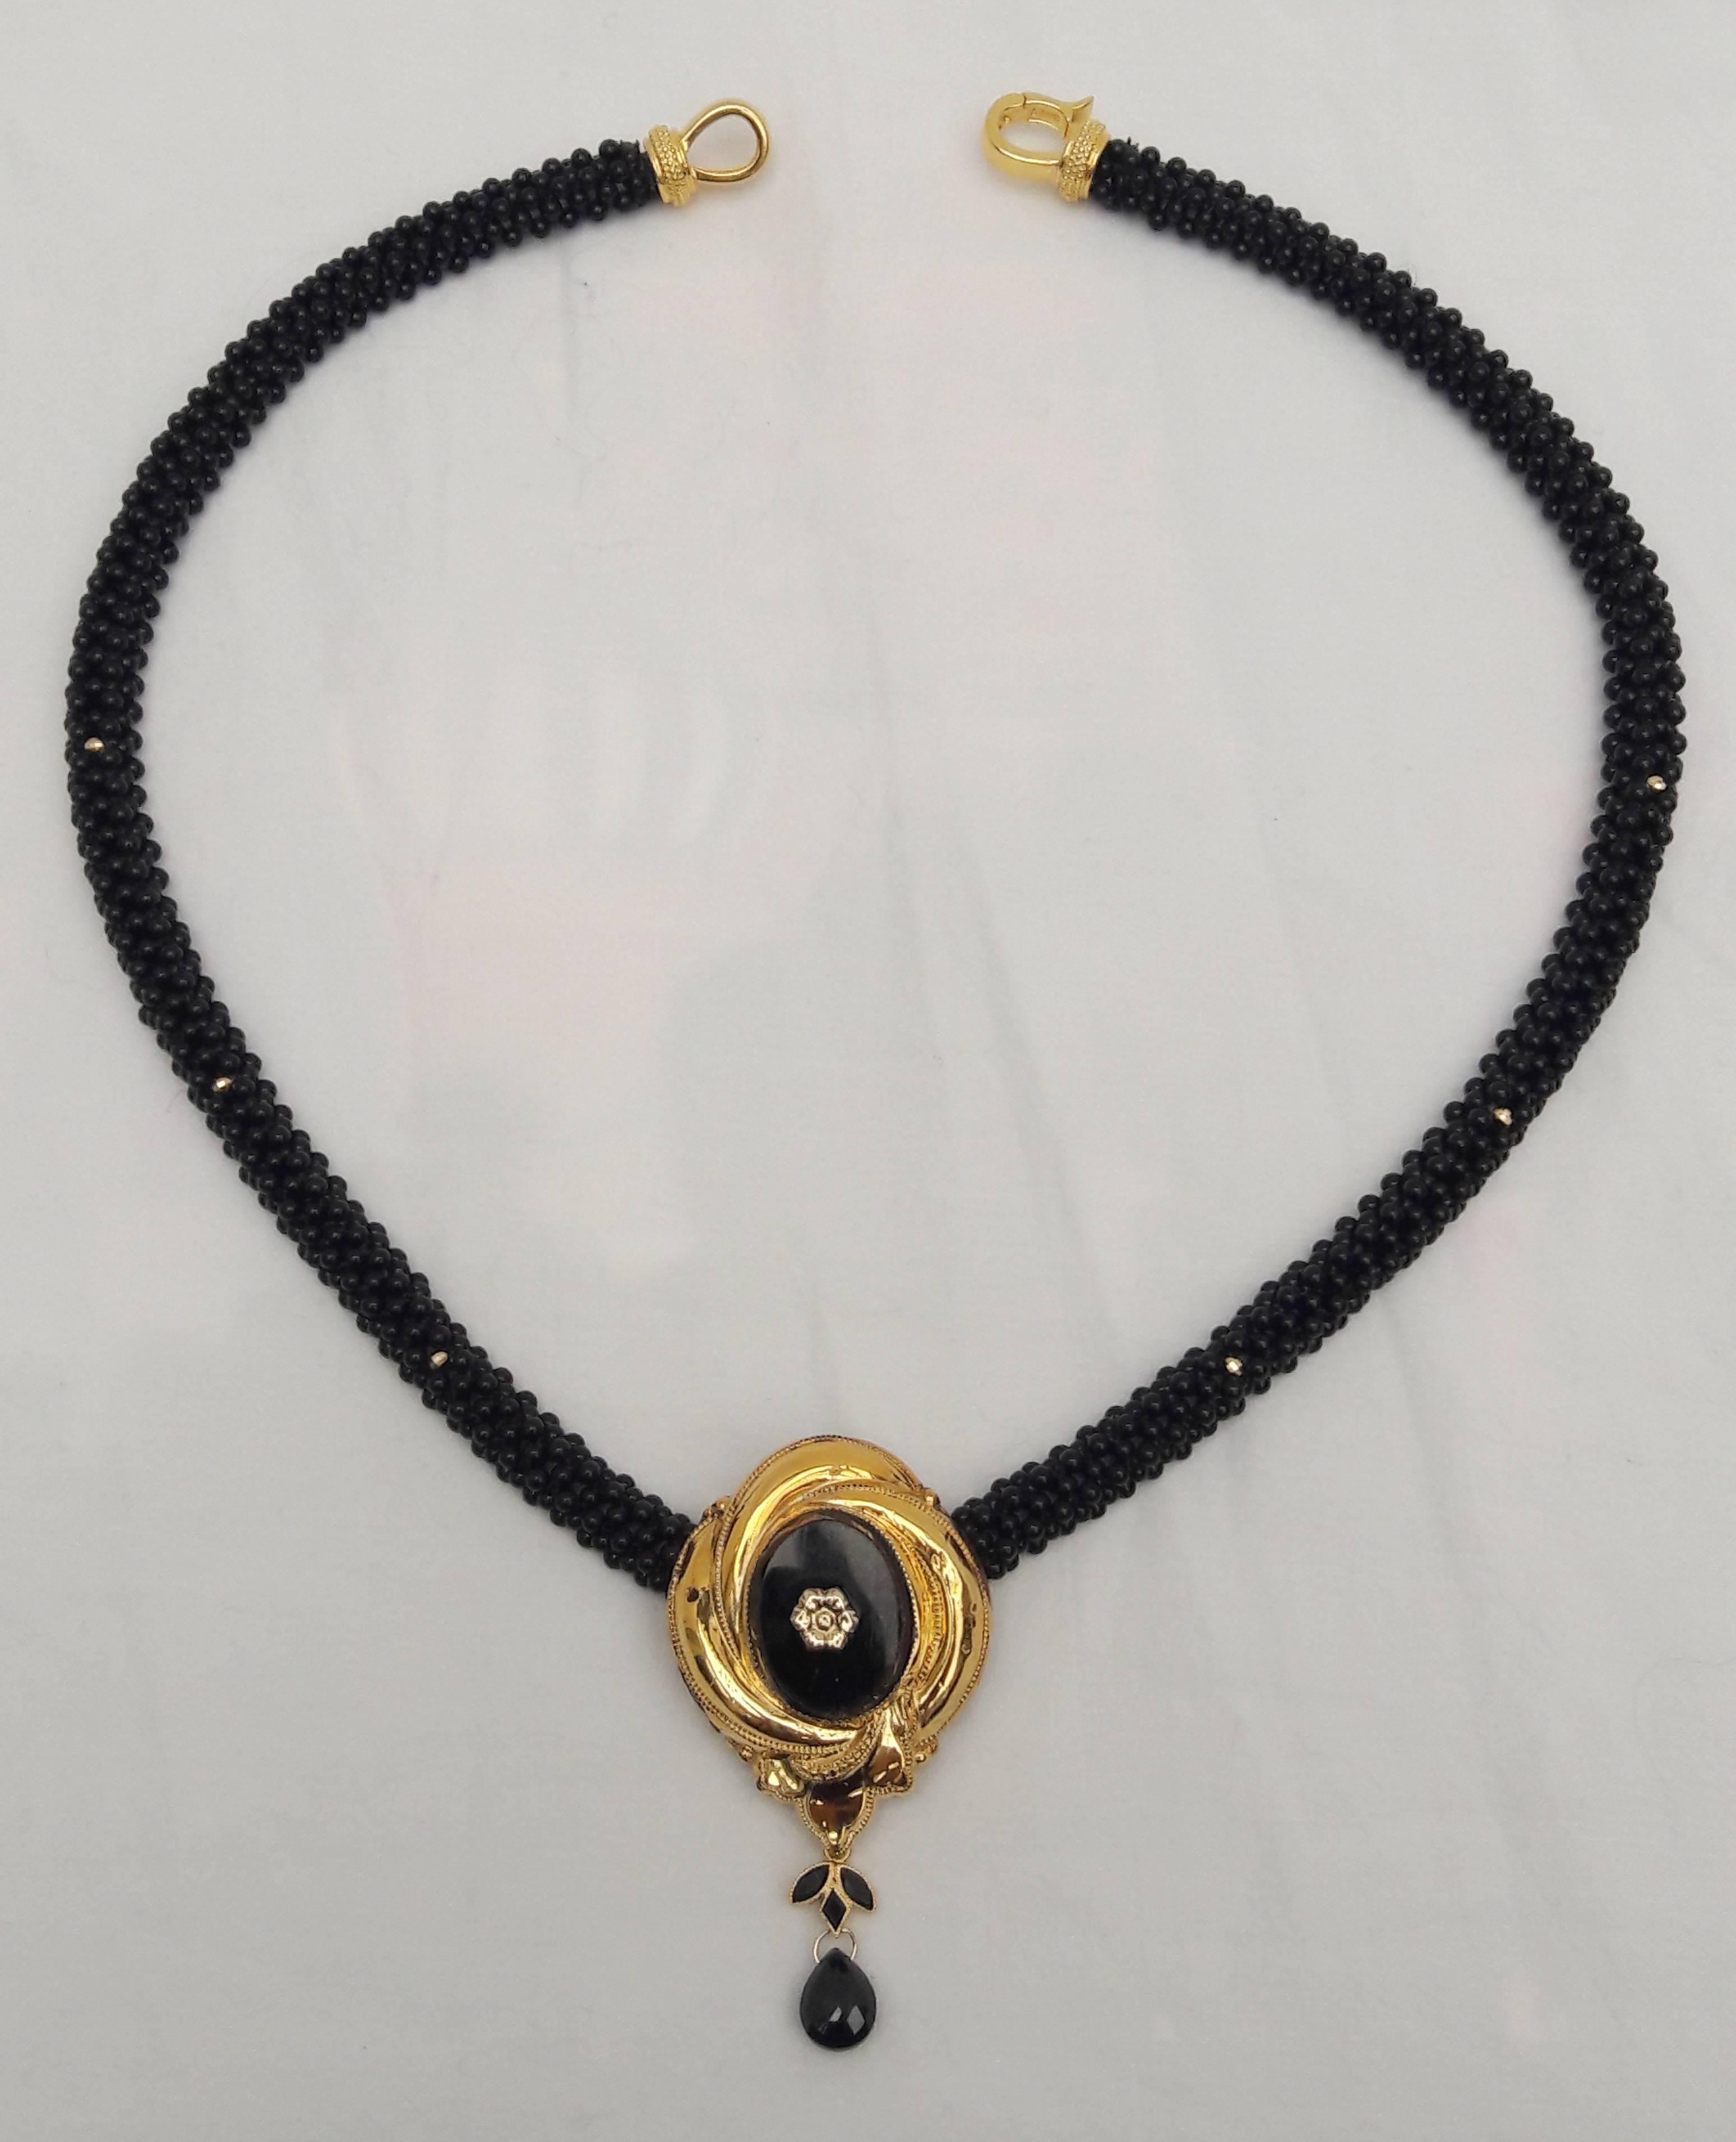 A unique and one-of-a-kind statement.

Made with hundred of carefully selected, smooth and round Black Onyx beads and woven into a tight, three dimensional rope. The intricate weaving pattern gives a very solid, dense feeling, while providing a